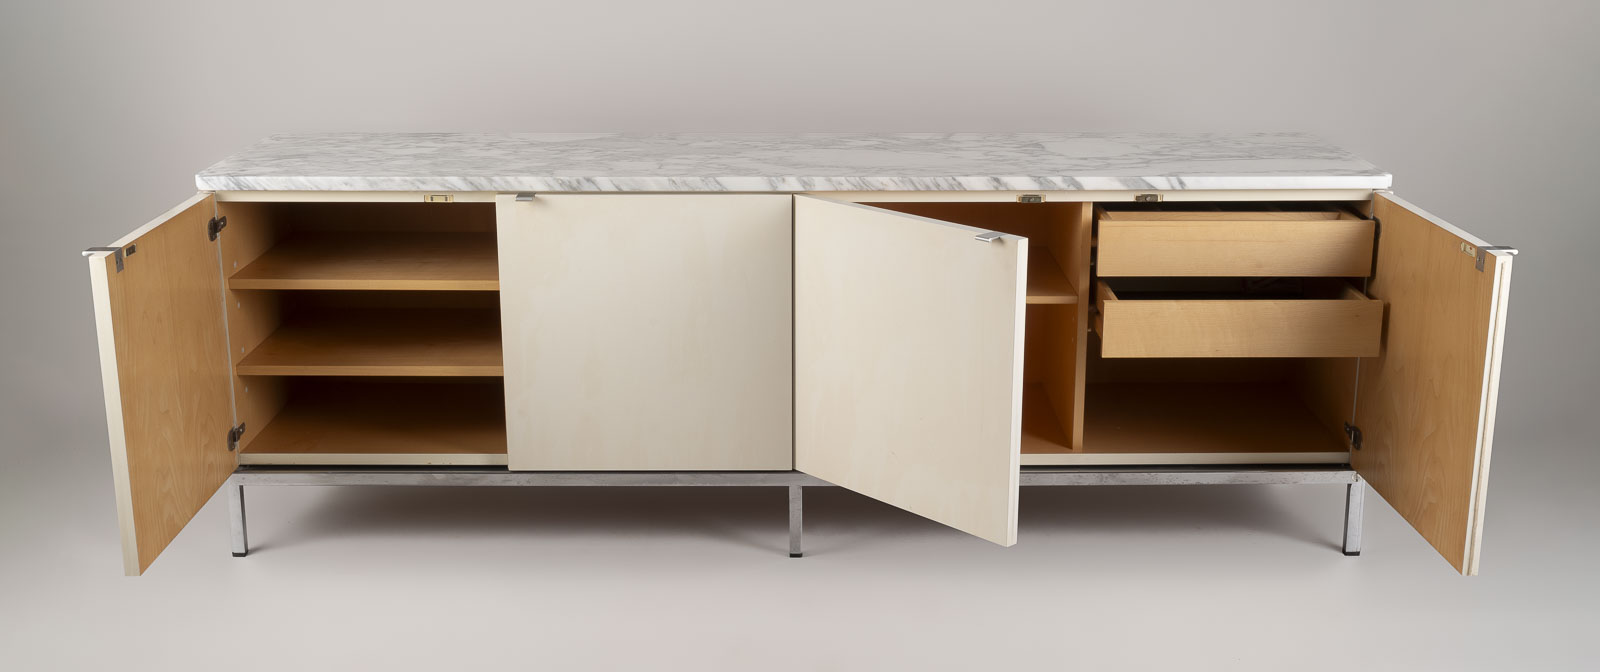 SIDEBOARD MODELL '2544' - Image 2 of 3